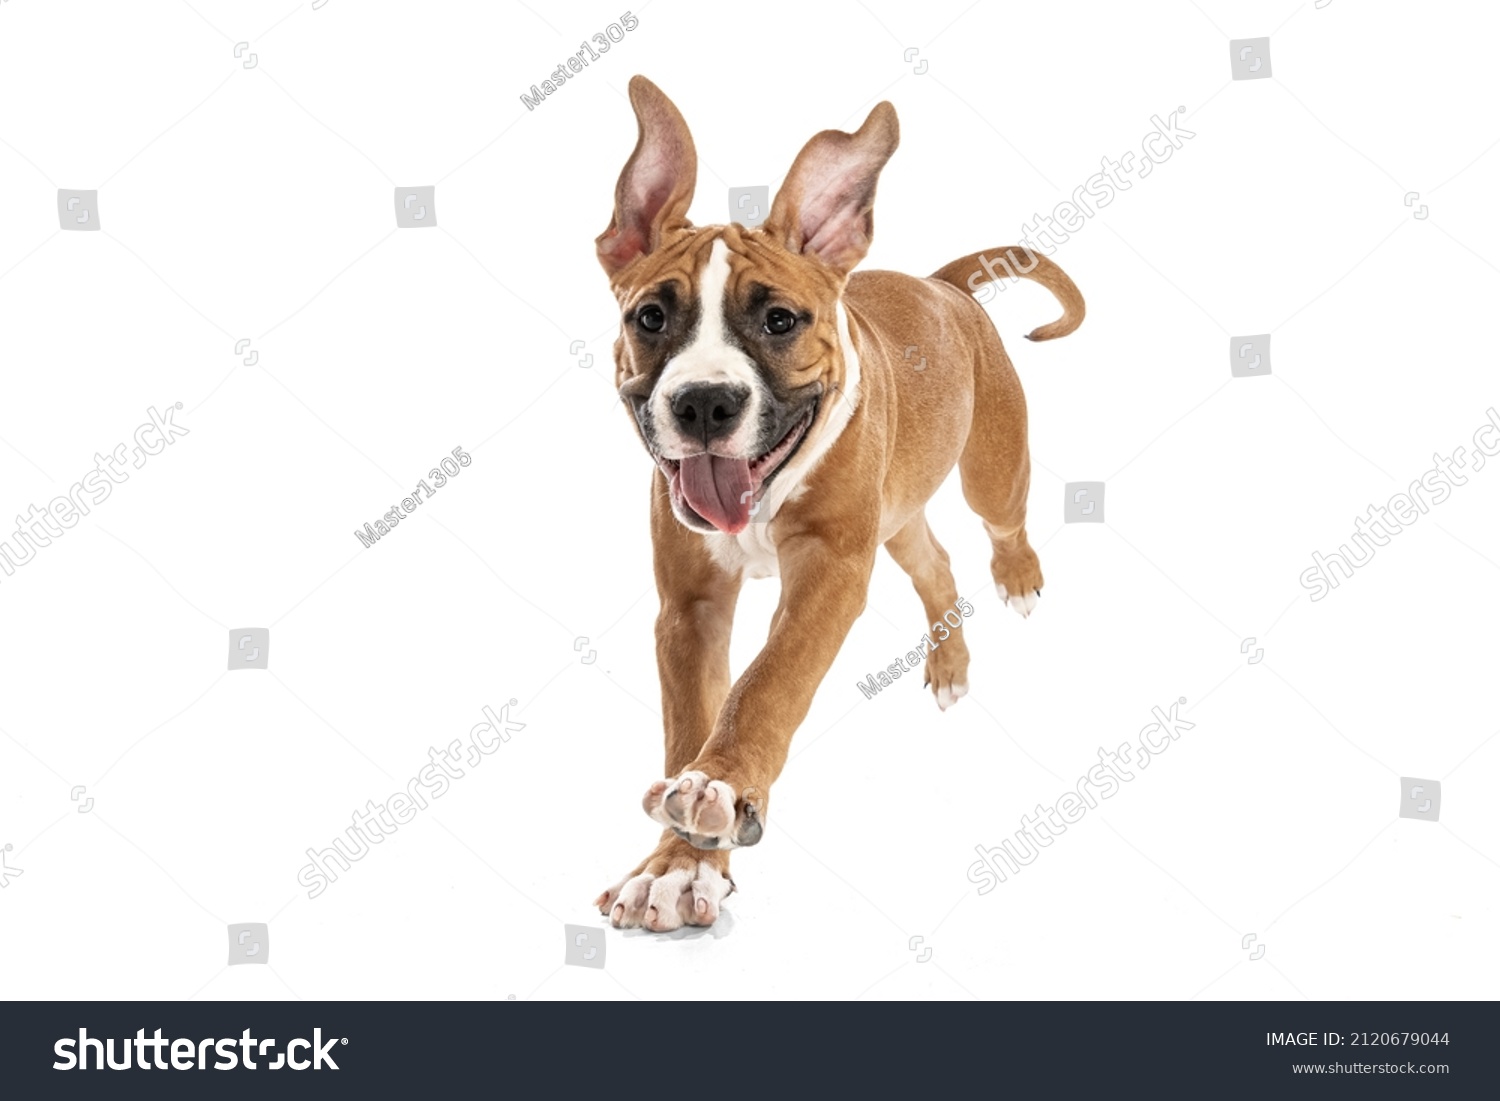 Cute, playful pet. Studio shot of American Staffordshire Terrier running isolated over white background. Concept of motion, beauty, vet, breed, action, pets love, animal life. Copy space for ad. #2120679044